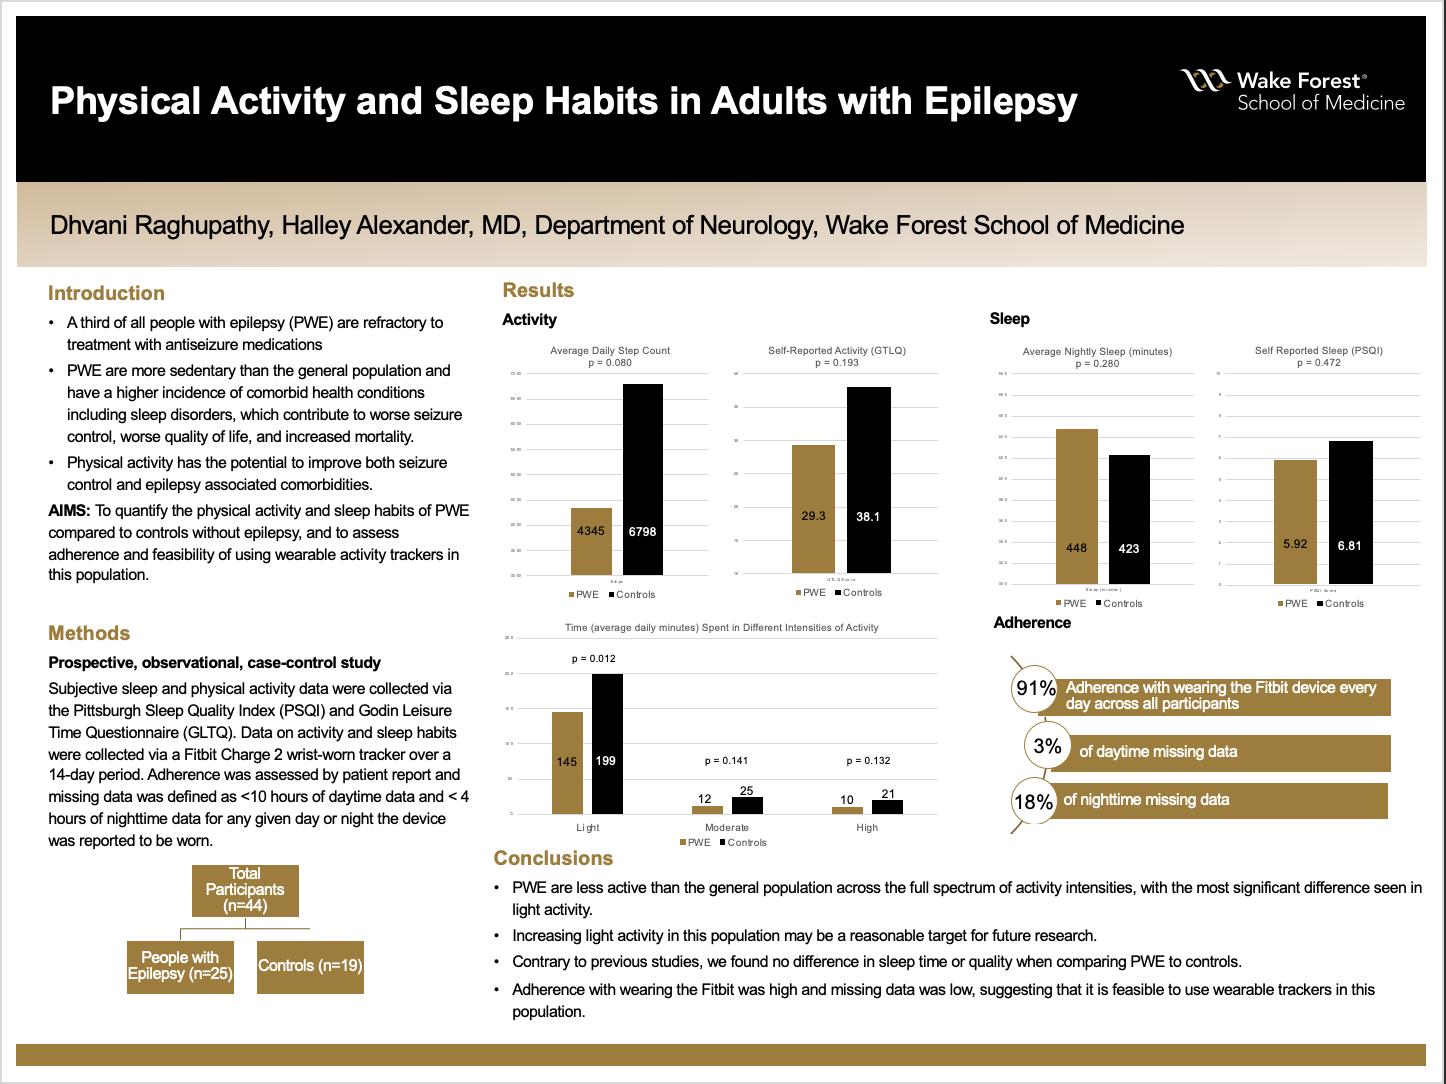 Showcase Image for Physical Activity and Sleep Habits in Adults with Epilepsy